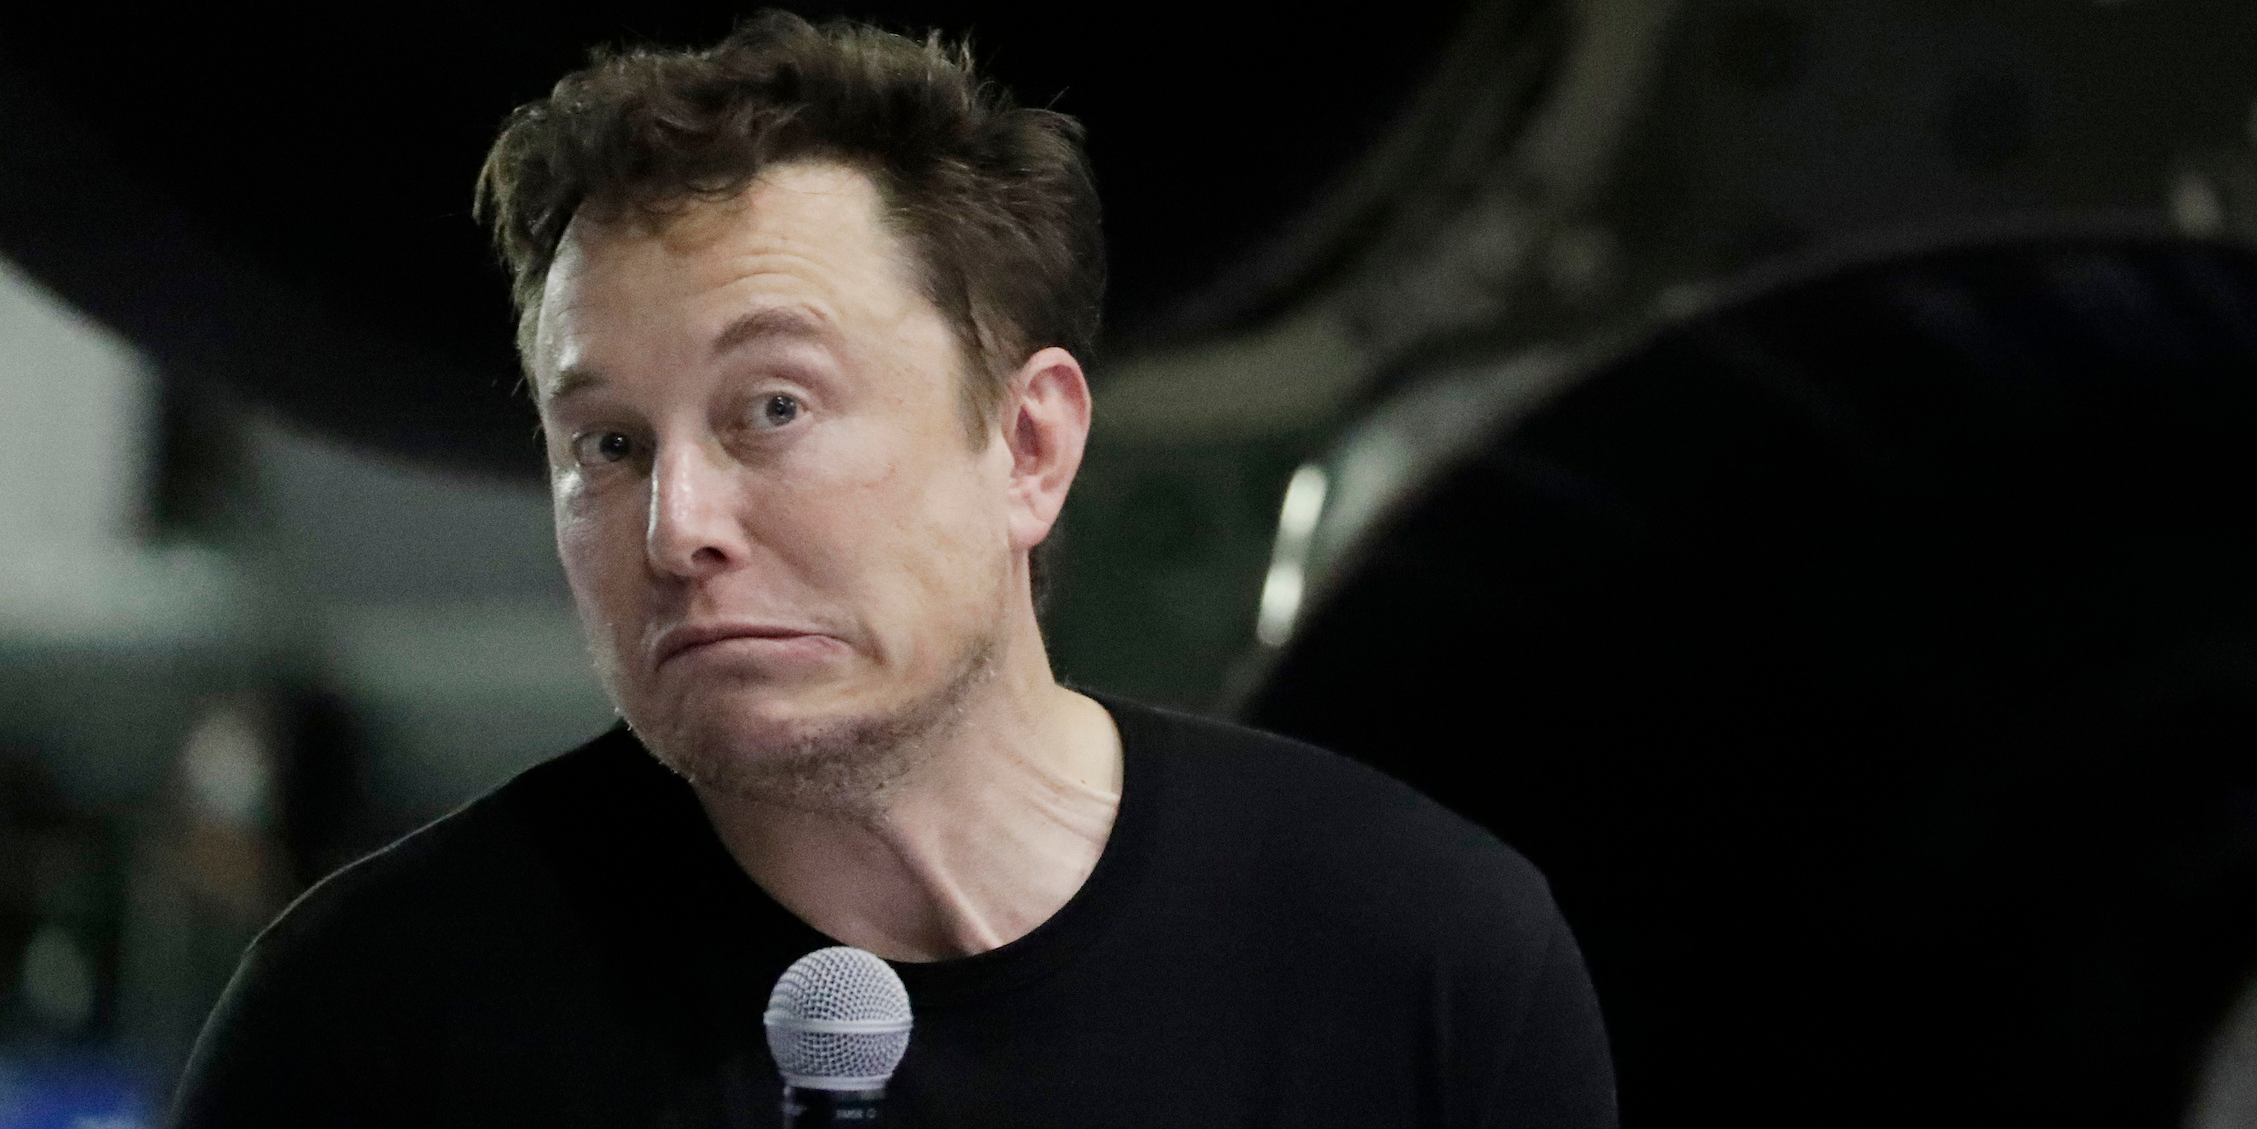 Elon Musk must once again speak out about crypto scammers